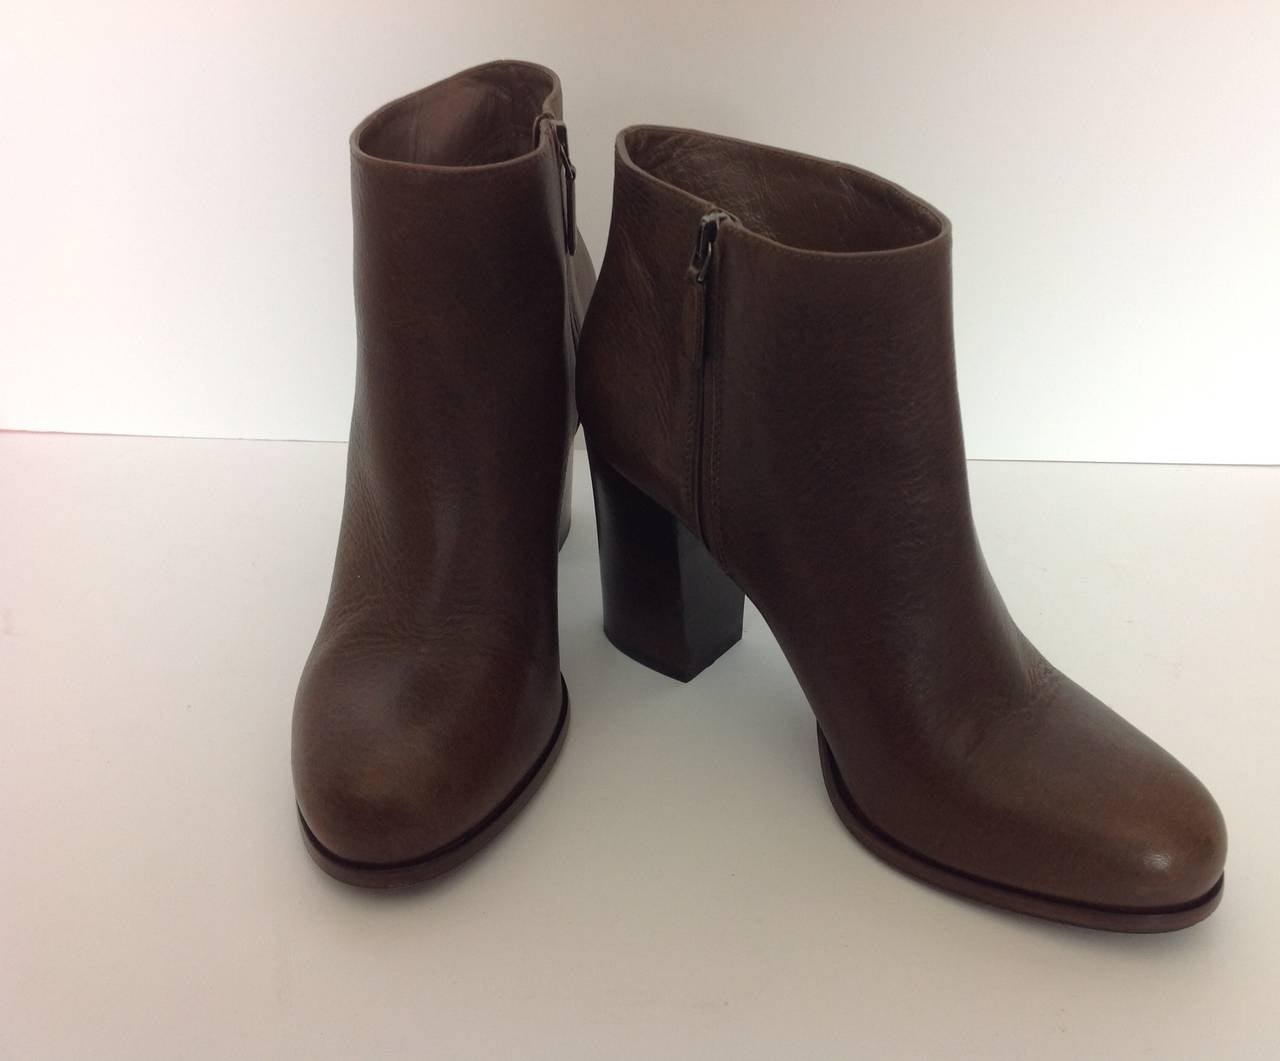 New Prada taupe leather bootie.     Size 39.
4 1/2